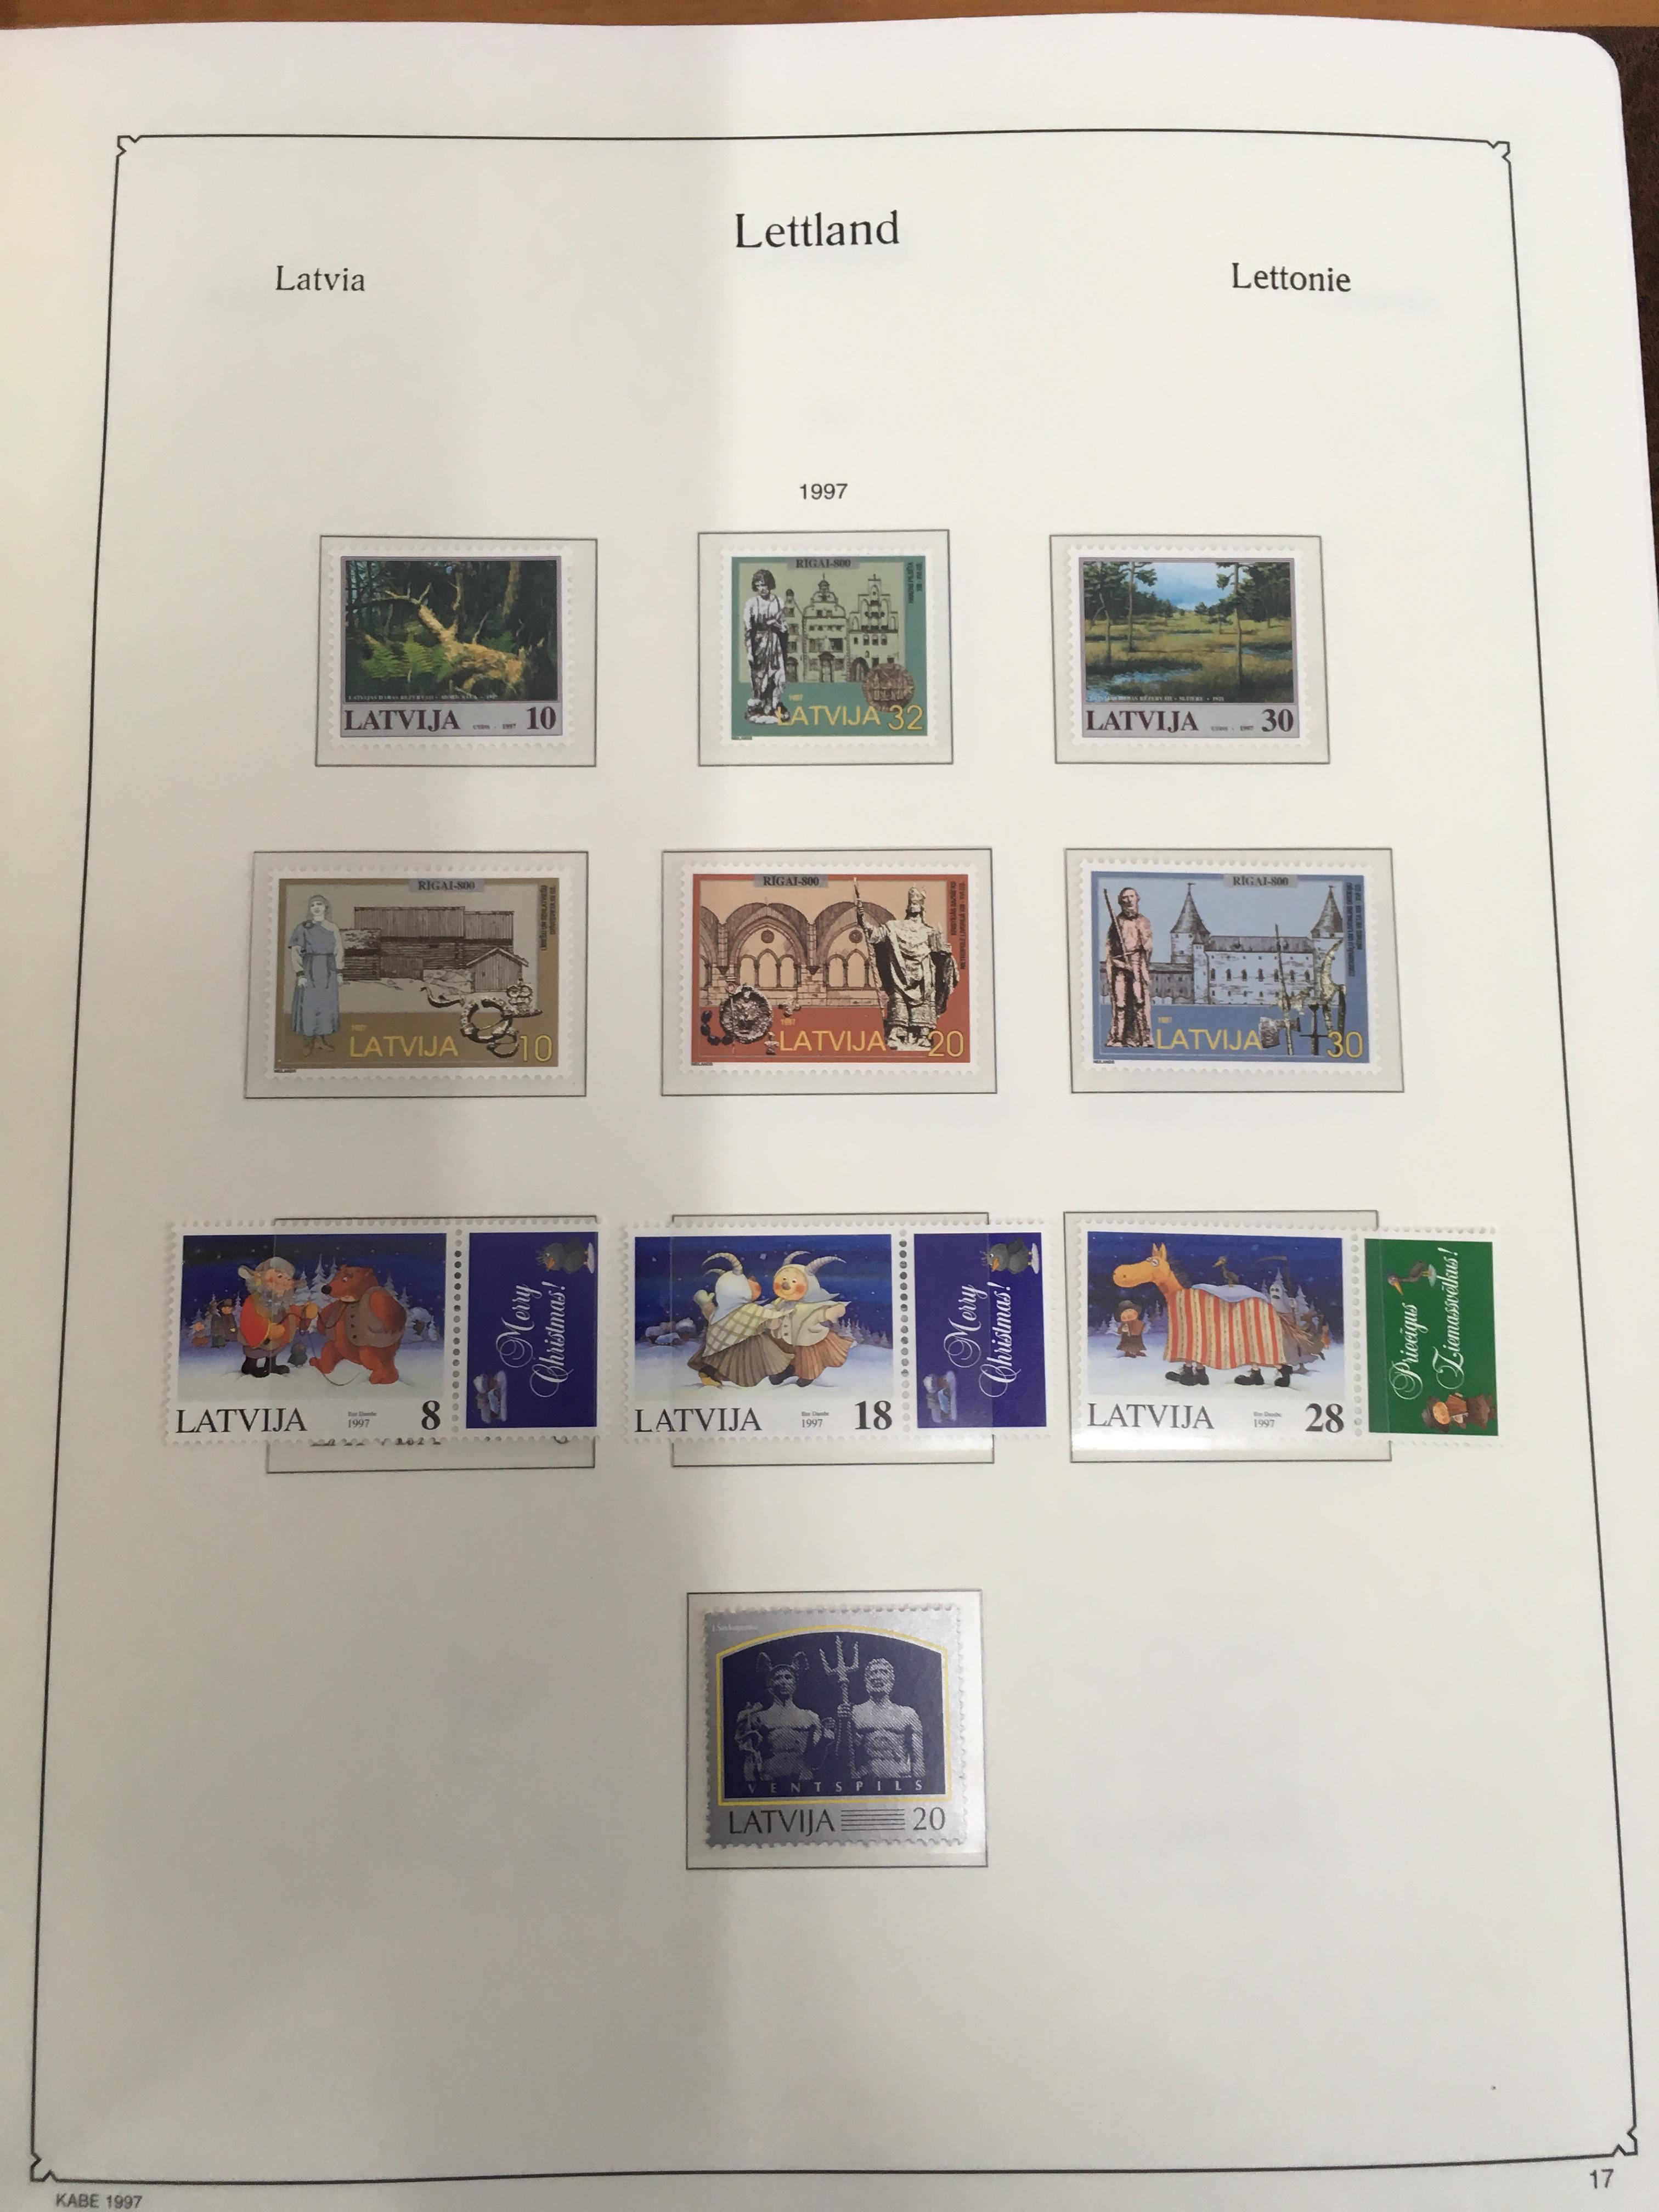 STAMPS: KA-BE ALBUM WITH A COLLECTION MINT LATVIA, LITHUANIA AND ESTONIA 1991-9 ISSUES. - Image 23 of 45